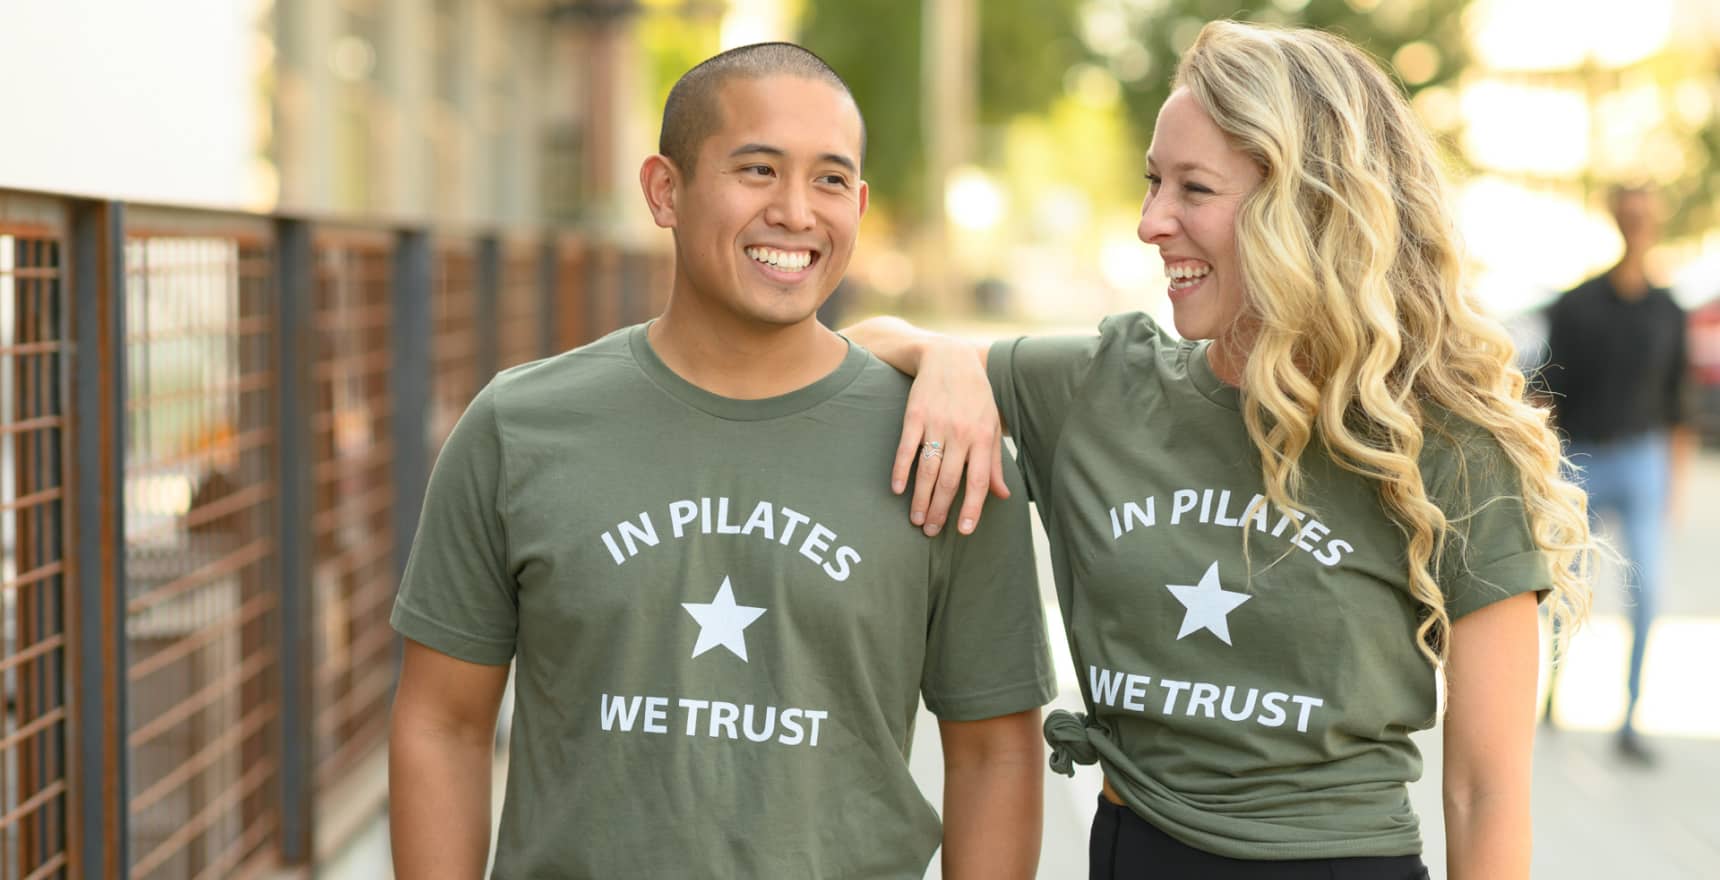 Club pilates, Better Every Day with Club Pilates T-Shirts sold by  AvereeAber, SKU 42629027